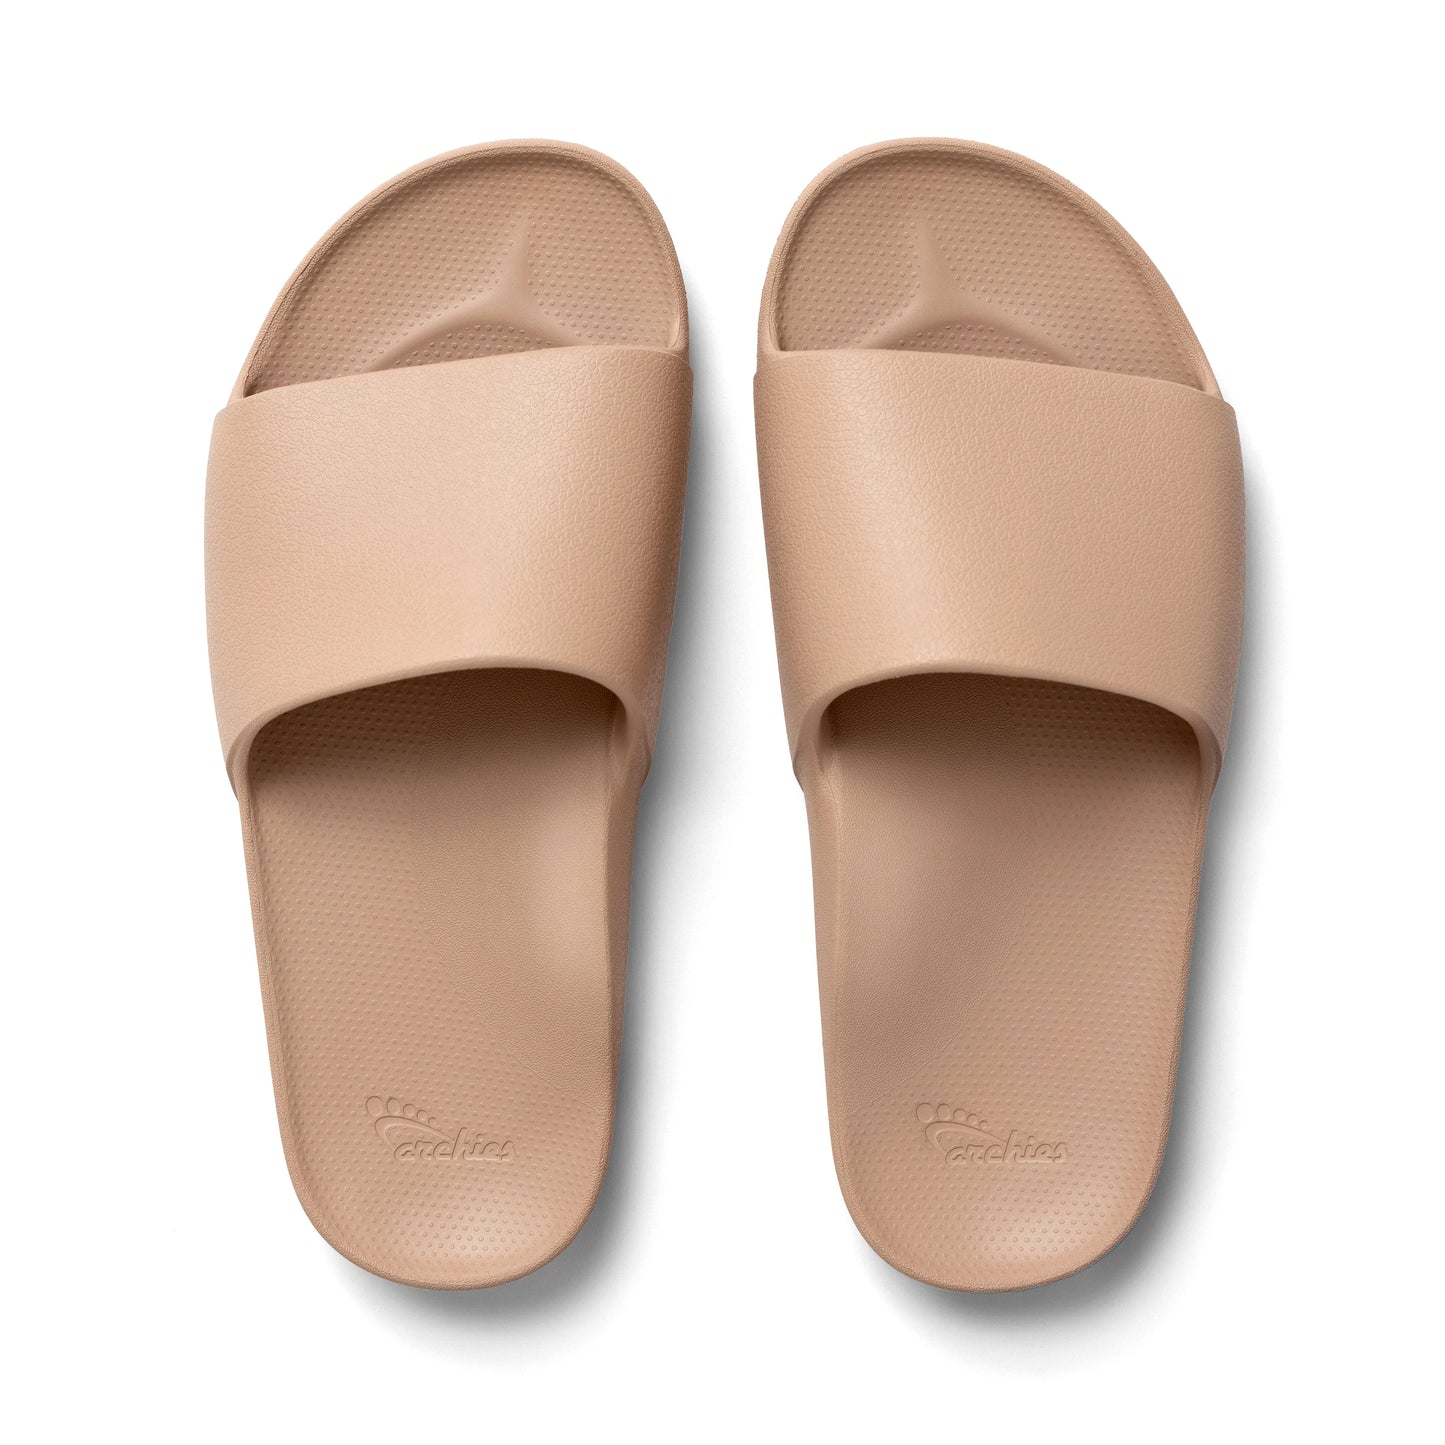 Introducing our all new Arch Support Slides. So comfy and supportive, you'll never take them off!  Tan Color